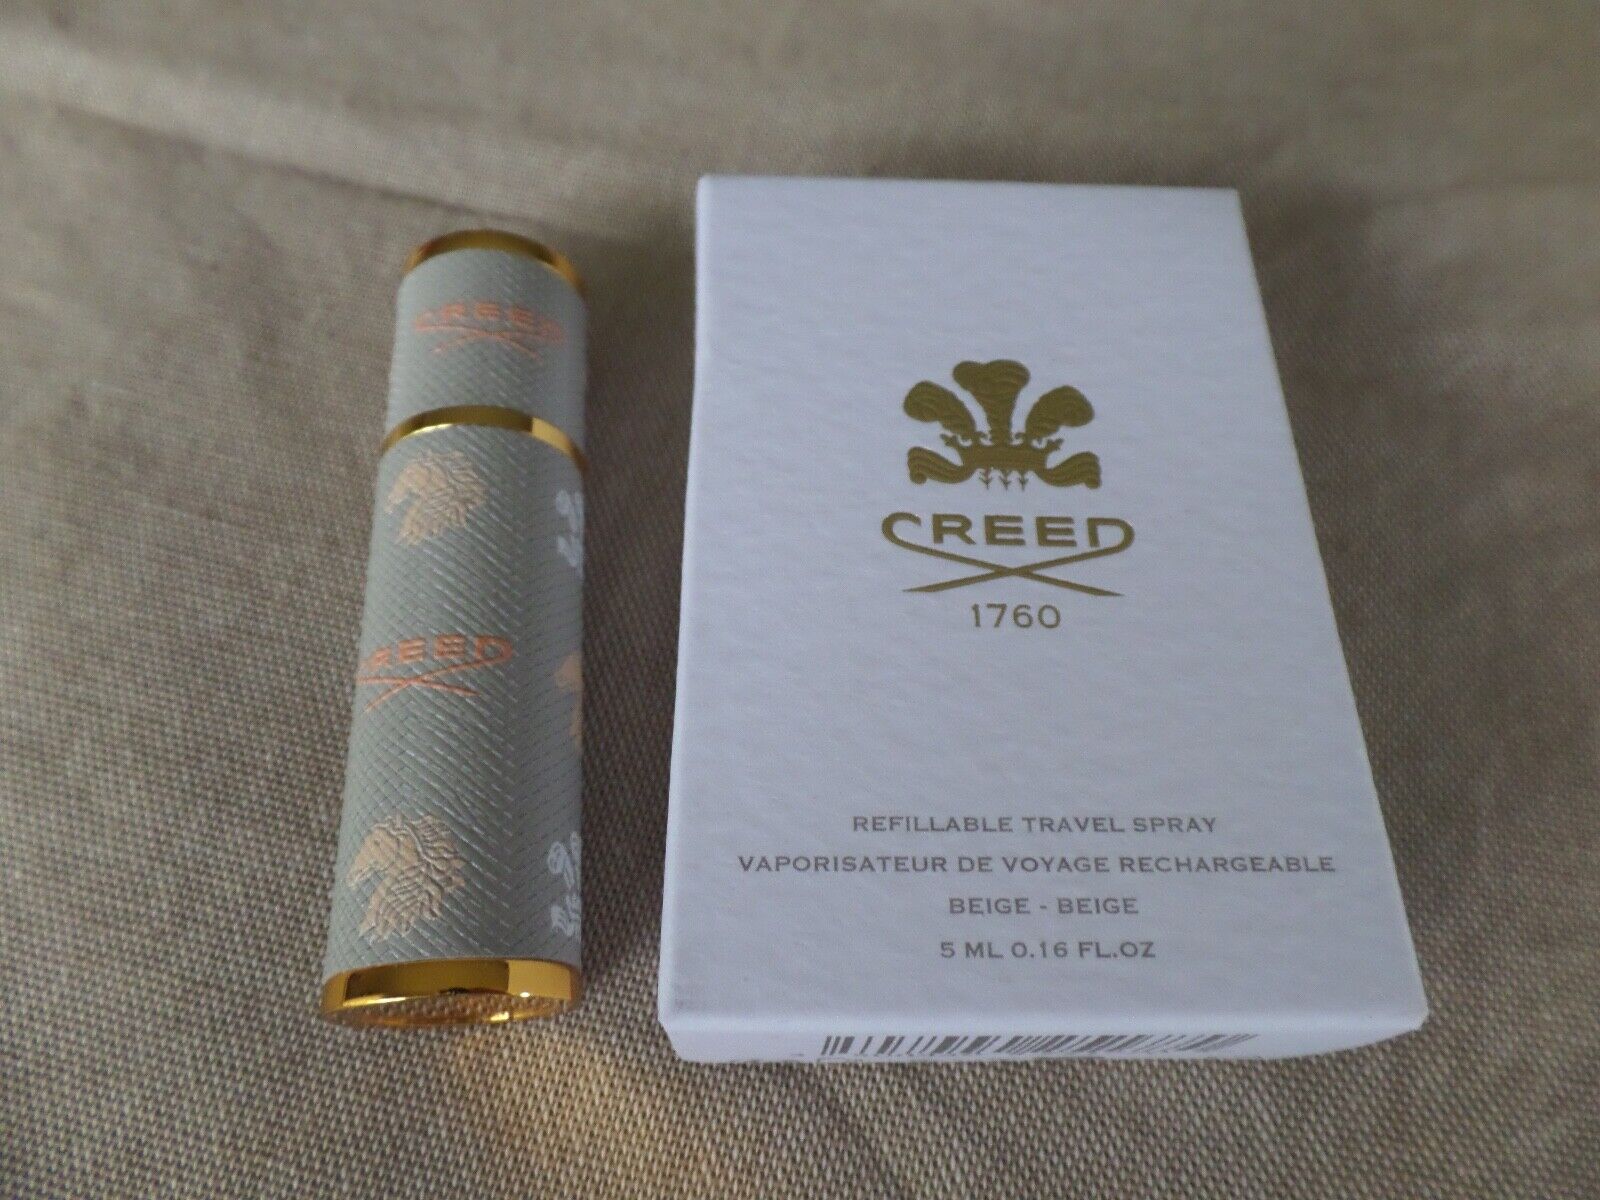 BRAND NEW IN BOX Creed Refillable Atomizer 5ml 0.16fl.oz Filled w/  Creed Viking